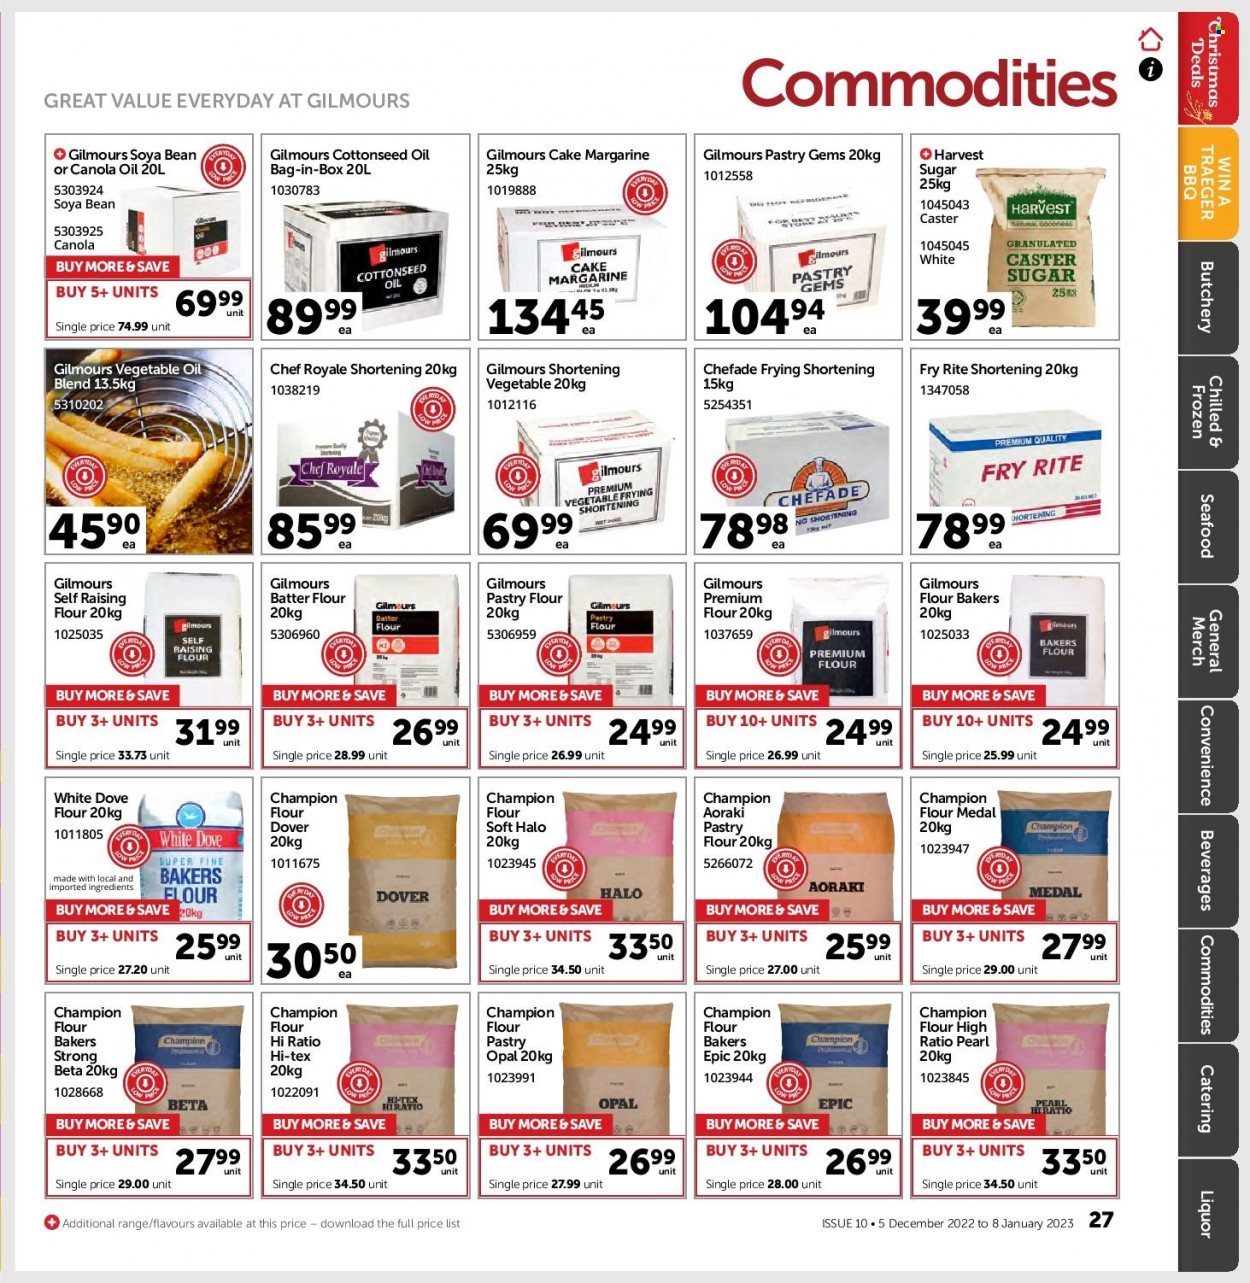 thumbnail - Gilmours mailer - 05.12.2022 - 08.01.2023 - Sales products - cake, seafood, margarine, Dove, flour, shortening, sugar, caster sugar, canola oil, vegetable oil, oil, liquor. Page 26.